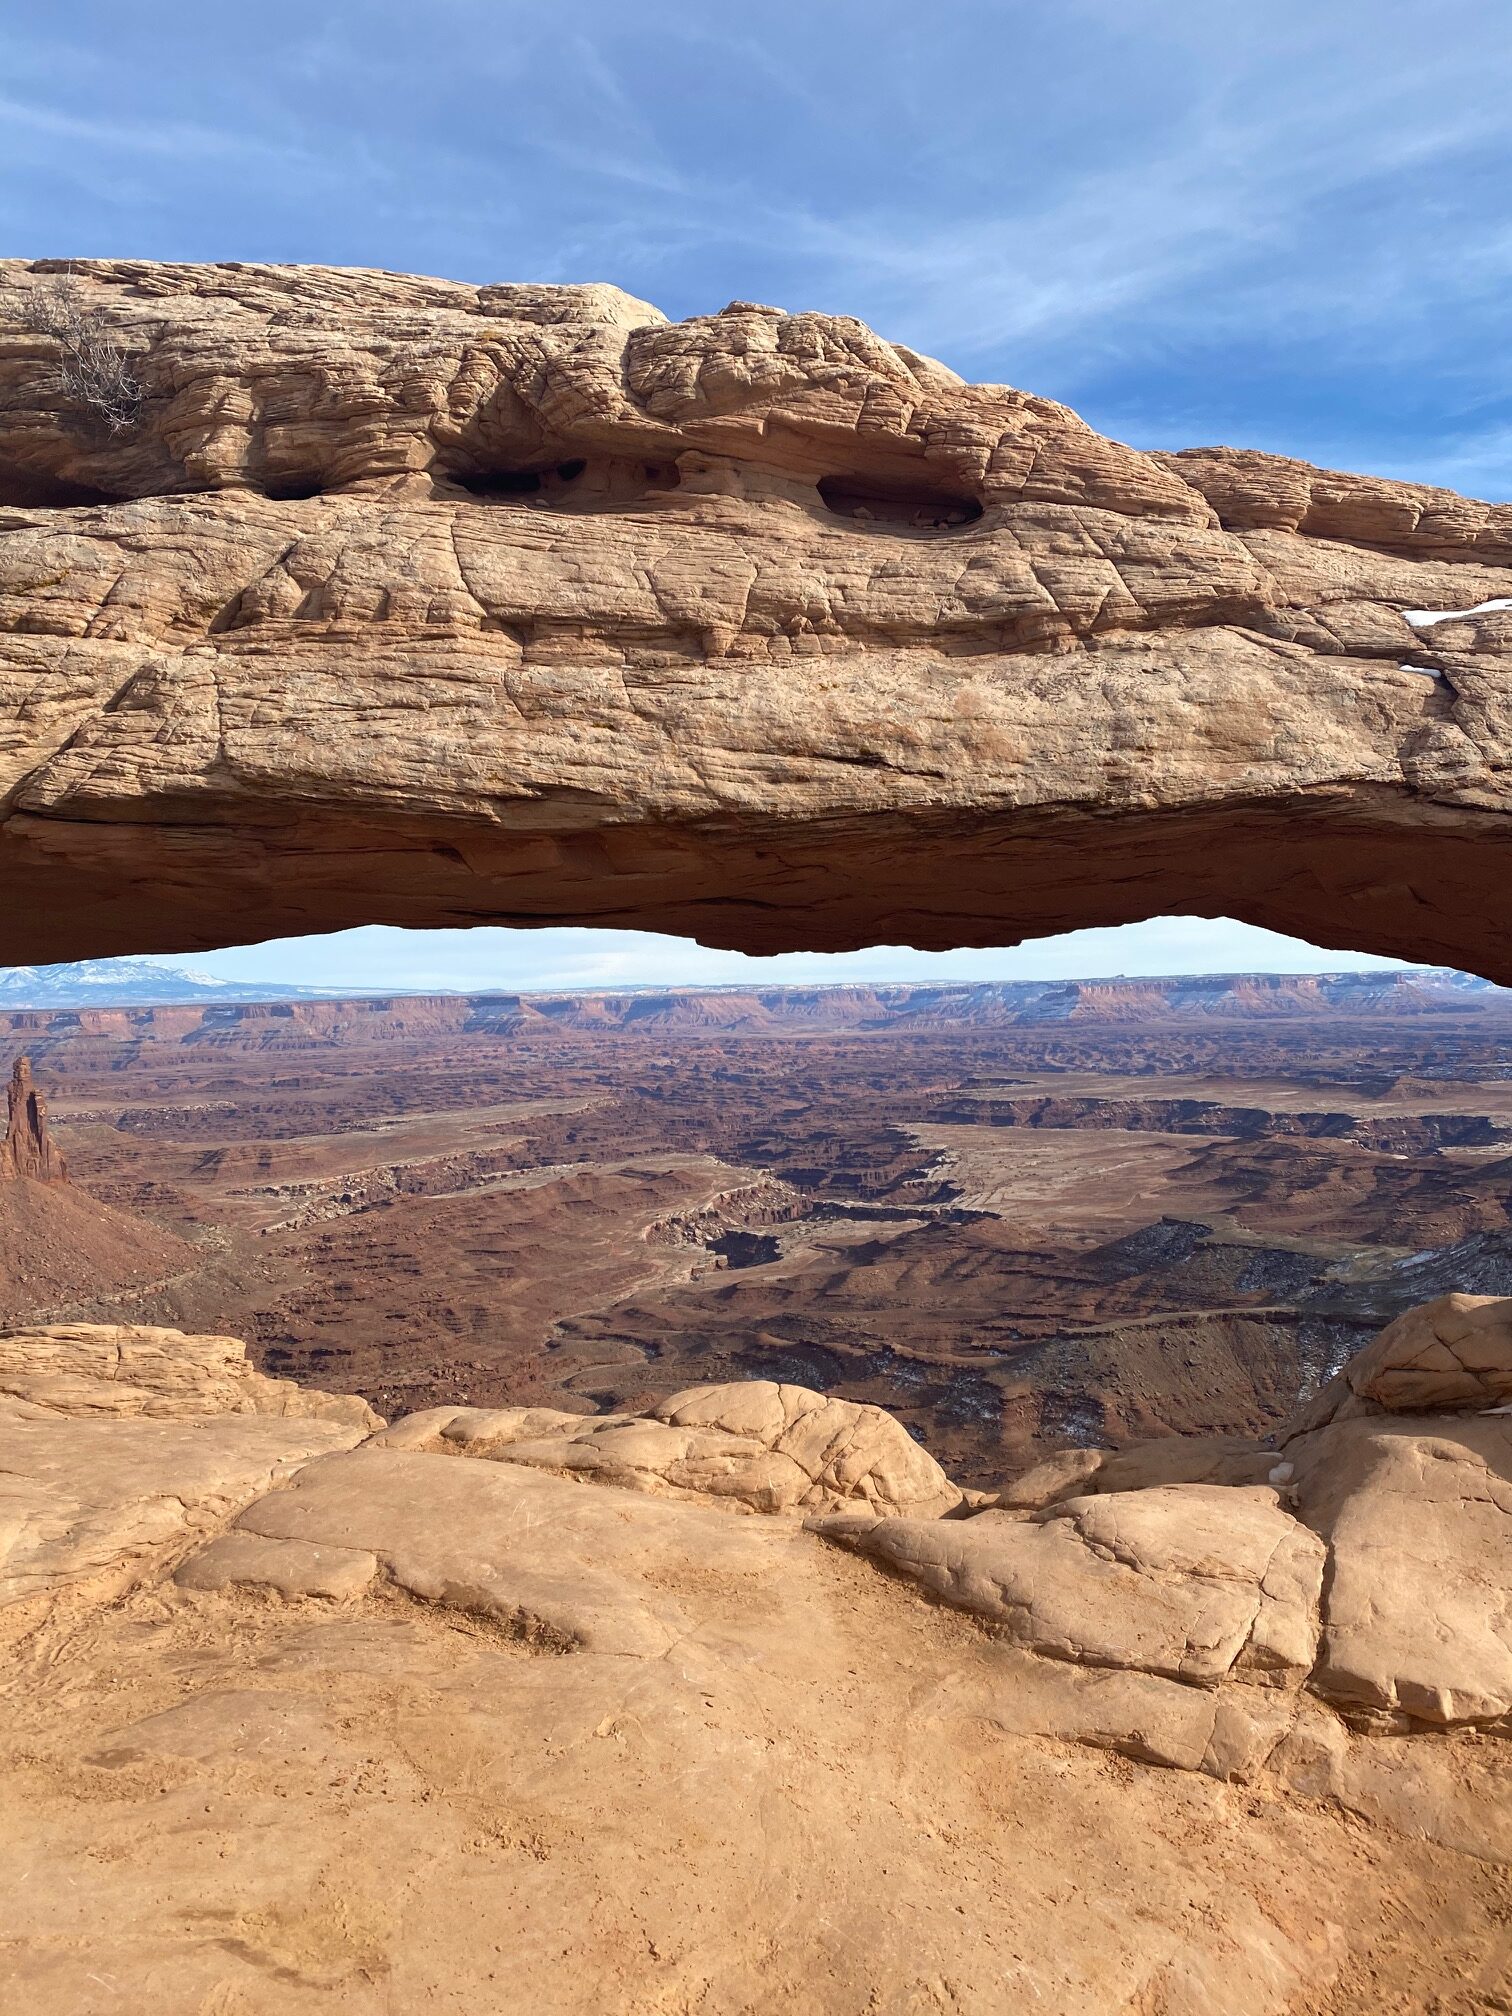 View through Mesa Arch of the vast Canyonlands National Park with canyons and mesas.